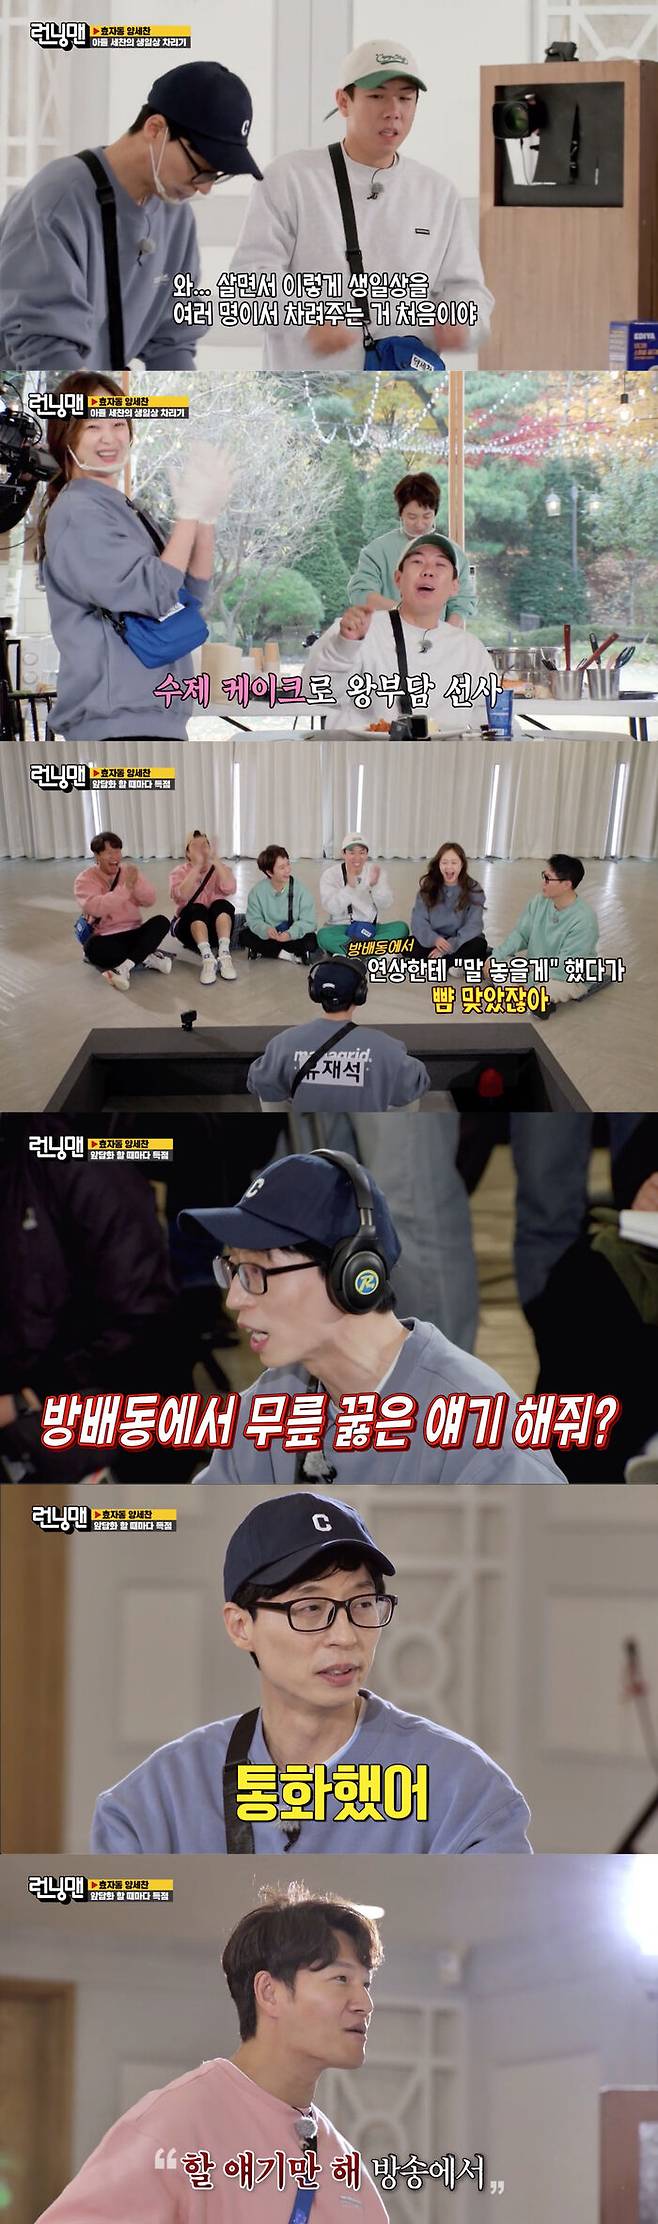 Yoo Jae-Suk revealed that a call was made from Yoon Eun-hye.On the 5th, SBS Running Man hosted Hyoja-dong Yang Se-chan Race for Yang Se-chans birthday.On the day of the show, the members set up a birthday for Yang Se-chan.Yang Se-chan said, It is the first time that many people have prepared a birthday prize while living.Jeon So-min, who claimed to be Yang Se-chans entertainment wife, made a fried rice cake.The members who watched this made fun of them, saying, Why are they taking a picture?And Yang Se-chan had a good face, even though he hated the behavior of Jeon So-min the most.The last mission of the day was a front-line mission: the rest of the members were front-lined about the member while each team leader wrote a headphone and listened to music.The team leader was able to press the button to listen to the adversary, but he had to hold back curiosity and not press the button to get the score.First was the adversary time for Yoo Jae-Suk; Ji Suk-jin unravelled the anecdotes of the past with the start.He disclosures the story of Yoo Jae-Suk being slapped in the cheek in the past after Ill talk to you from now on to an older woman in Bangbae-dong.Even after that, Ji Suk-jins Disclosure continued.After all, Yoo Jae-Suk, who could not stand his curiosity and pressed the button, heard what he said and said, Tell me about kneeling in this brother Bangbae-dong?I laughed against Disclosure.Next up is Kim Jong-kook, who said theres a lot to say.And he immediately said, I texted you to grace, he said.Kim Jong-kook, who noticed the smell of Yoo Jae-Suk, was listening to all the stories early on by pressing the button.The uninformed Yoo Jae-Suk continued his texting and texting with Yoon Eun-hye, who said, I was worried that I would be hurt by grace, but I did not. I talked to him.And at this point, Yoo Jae-Suk noticed that Kim Jong-kook was listening.I asked a number of questions to check if Kim Jong-kook was listening with the members.Song Ji-hyo asked, Do you like me? Do you like Yoon Eun-hye? and Kim Jong-kook laughed and it became clear that he was listening.Kim Jong-kook was furious after the adversary time ended.From Yang Se-chan, who said he could not play soccer to Haha, who shot him for not fighting, and Yoo Jae-Suk, who brought up the story of Yoon Eun-hye again.Kim Jong-kook pressed them just talk to me, on the air; so Yoo Jae-Suk said, Ill erase the grace number; I havent spoken since.I just said that I was glad to see you. I said I was sorry for my grace, and I said it was okay. 